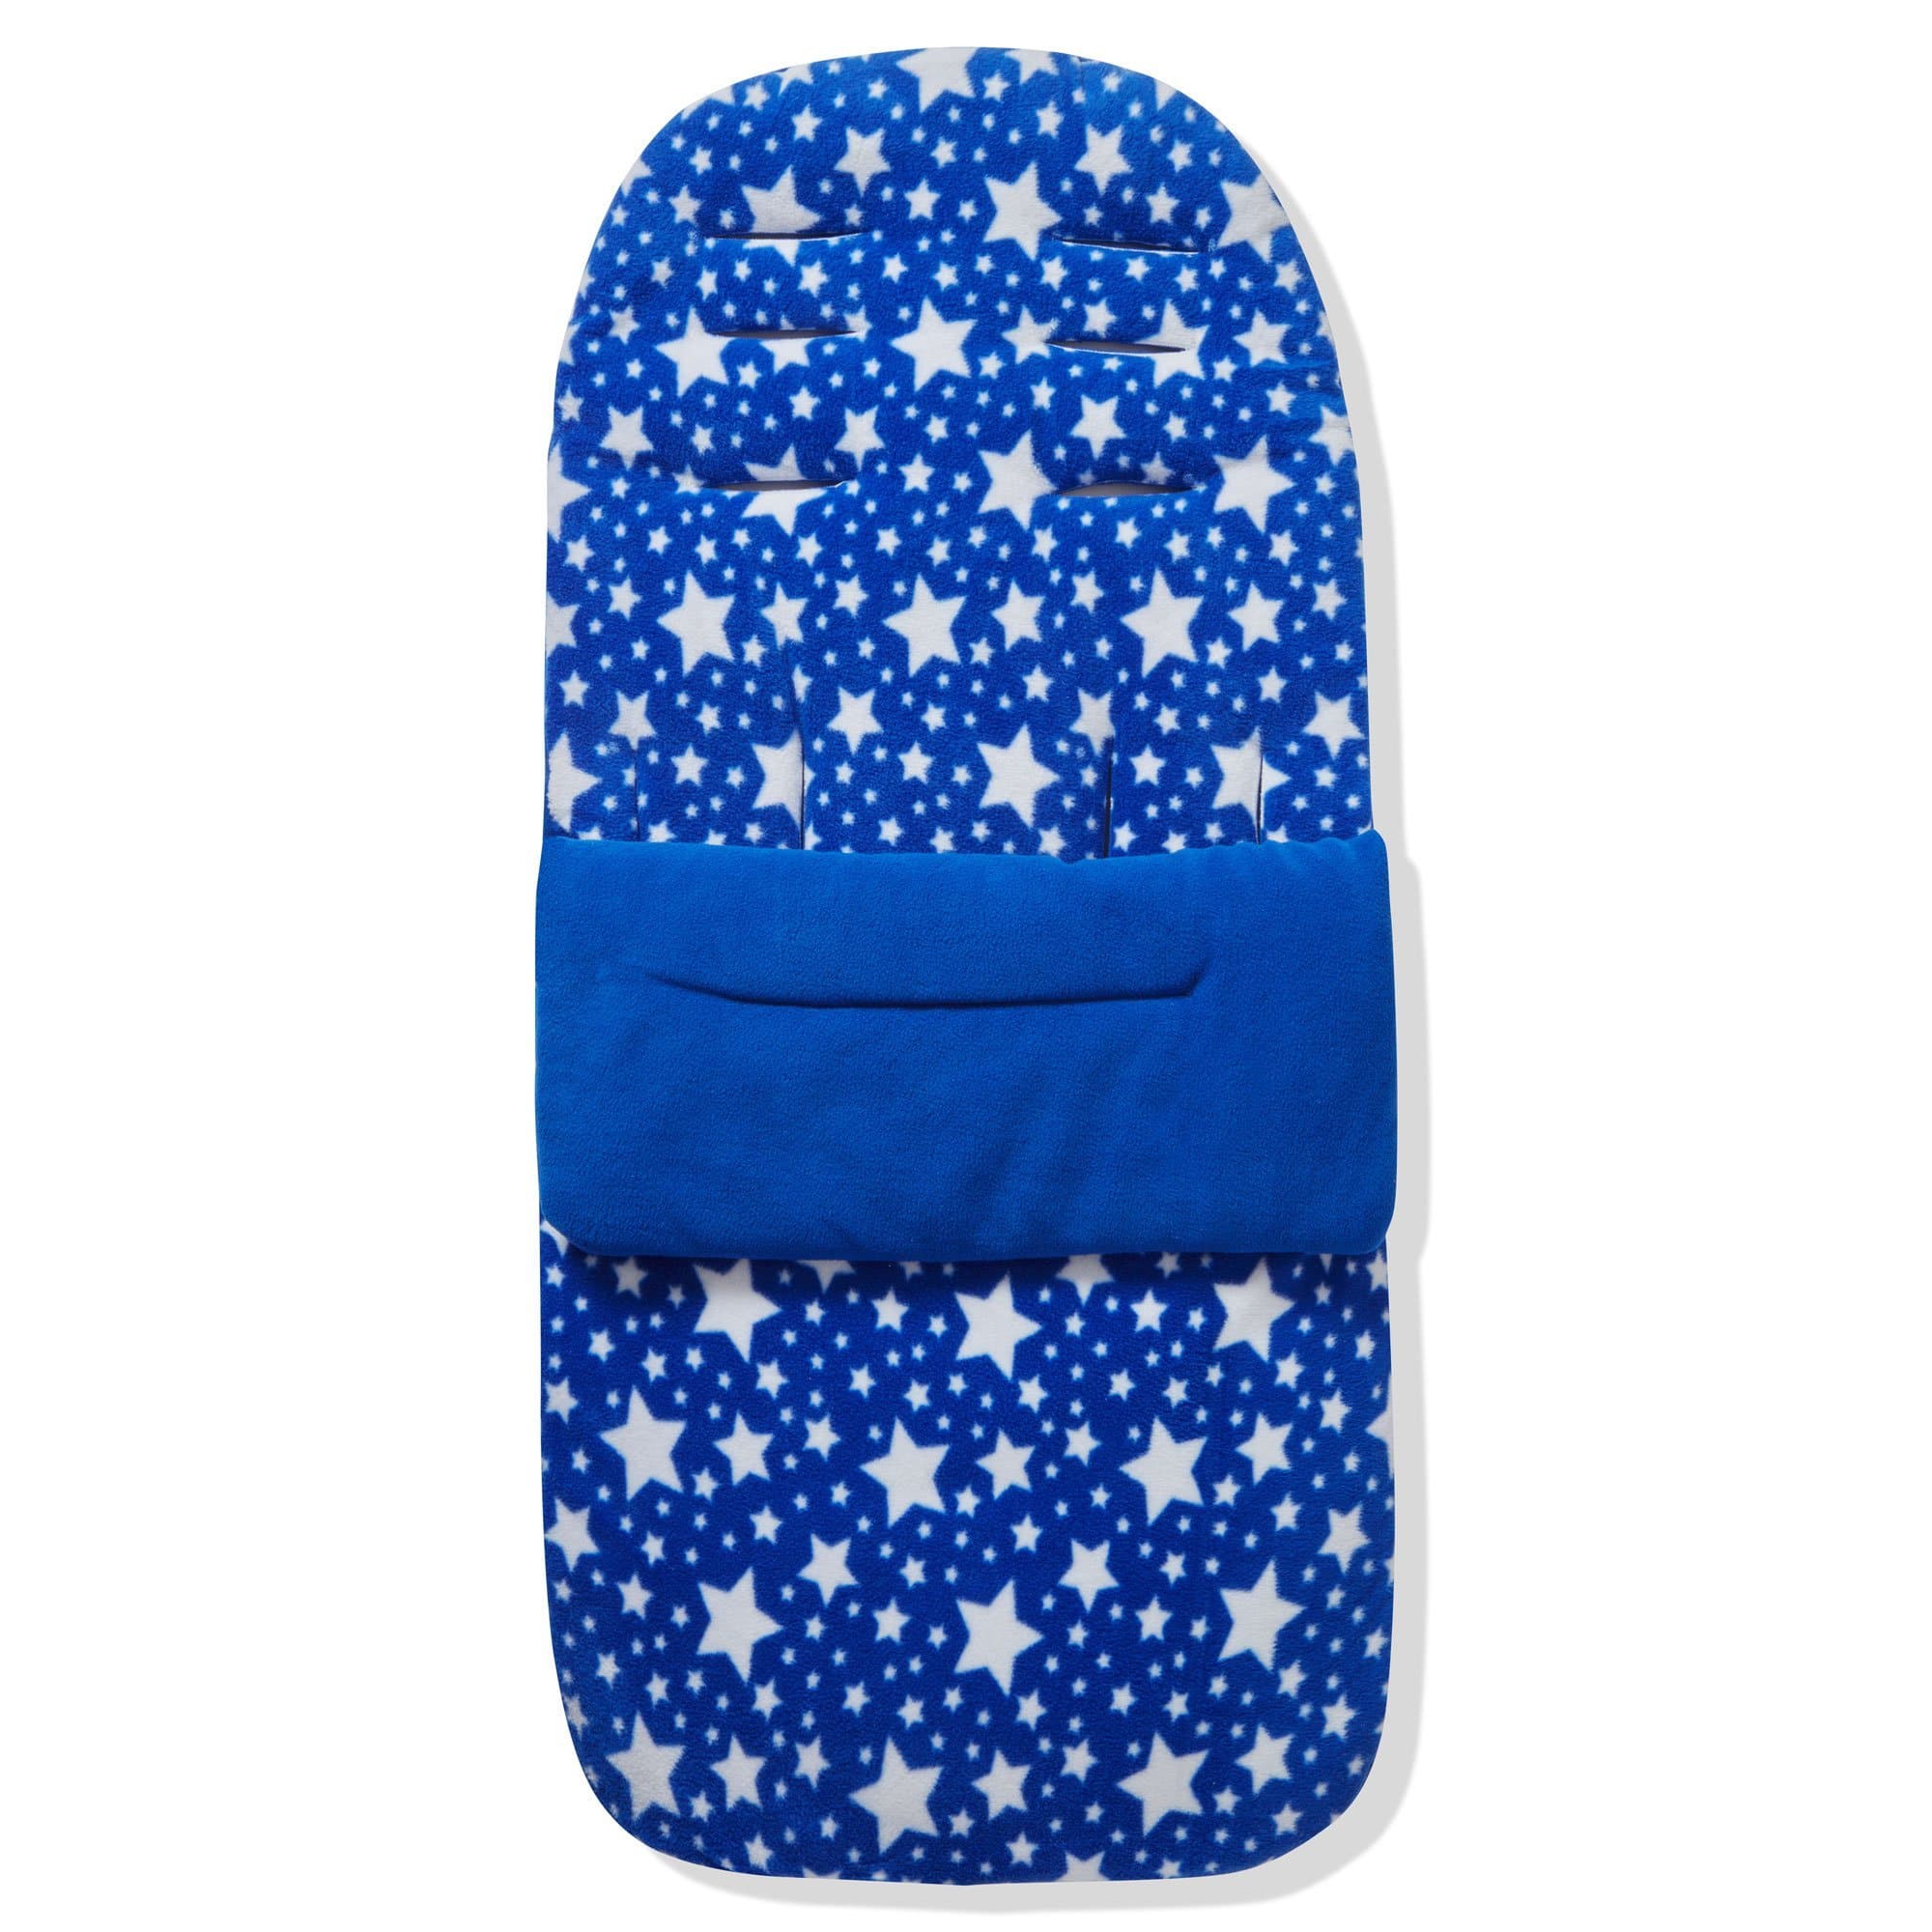 Fleece Footmuff / Cosy Toes Compatible with Babystyle - Blue Star / Fits All Models | For Your Little One